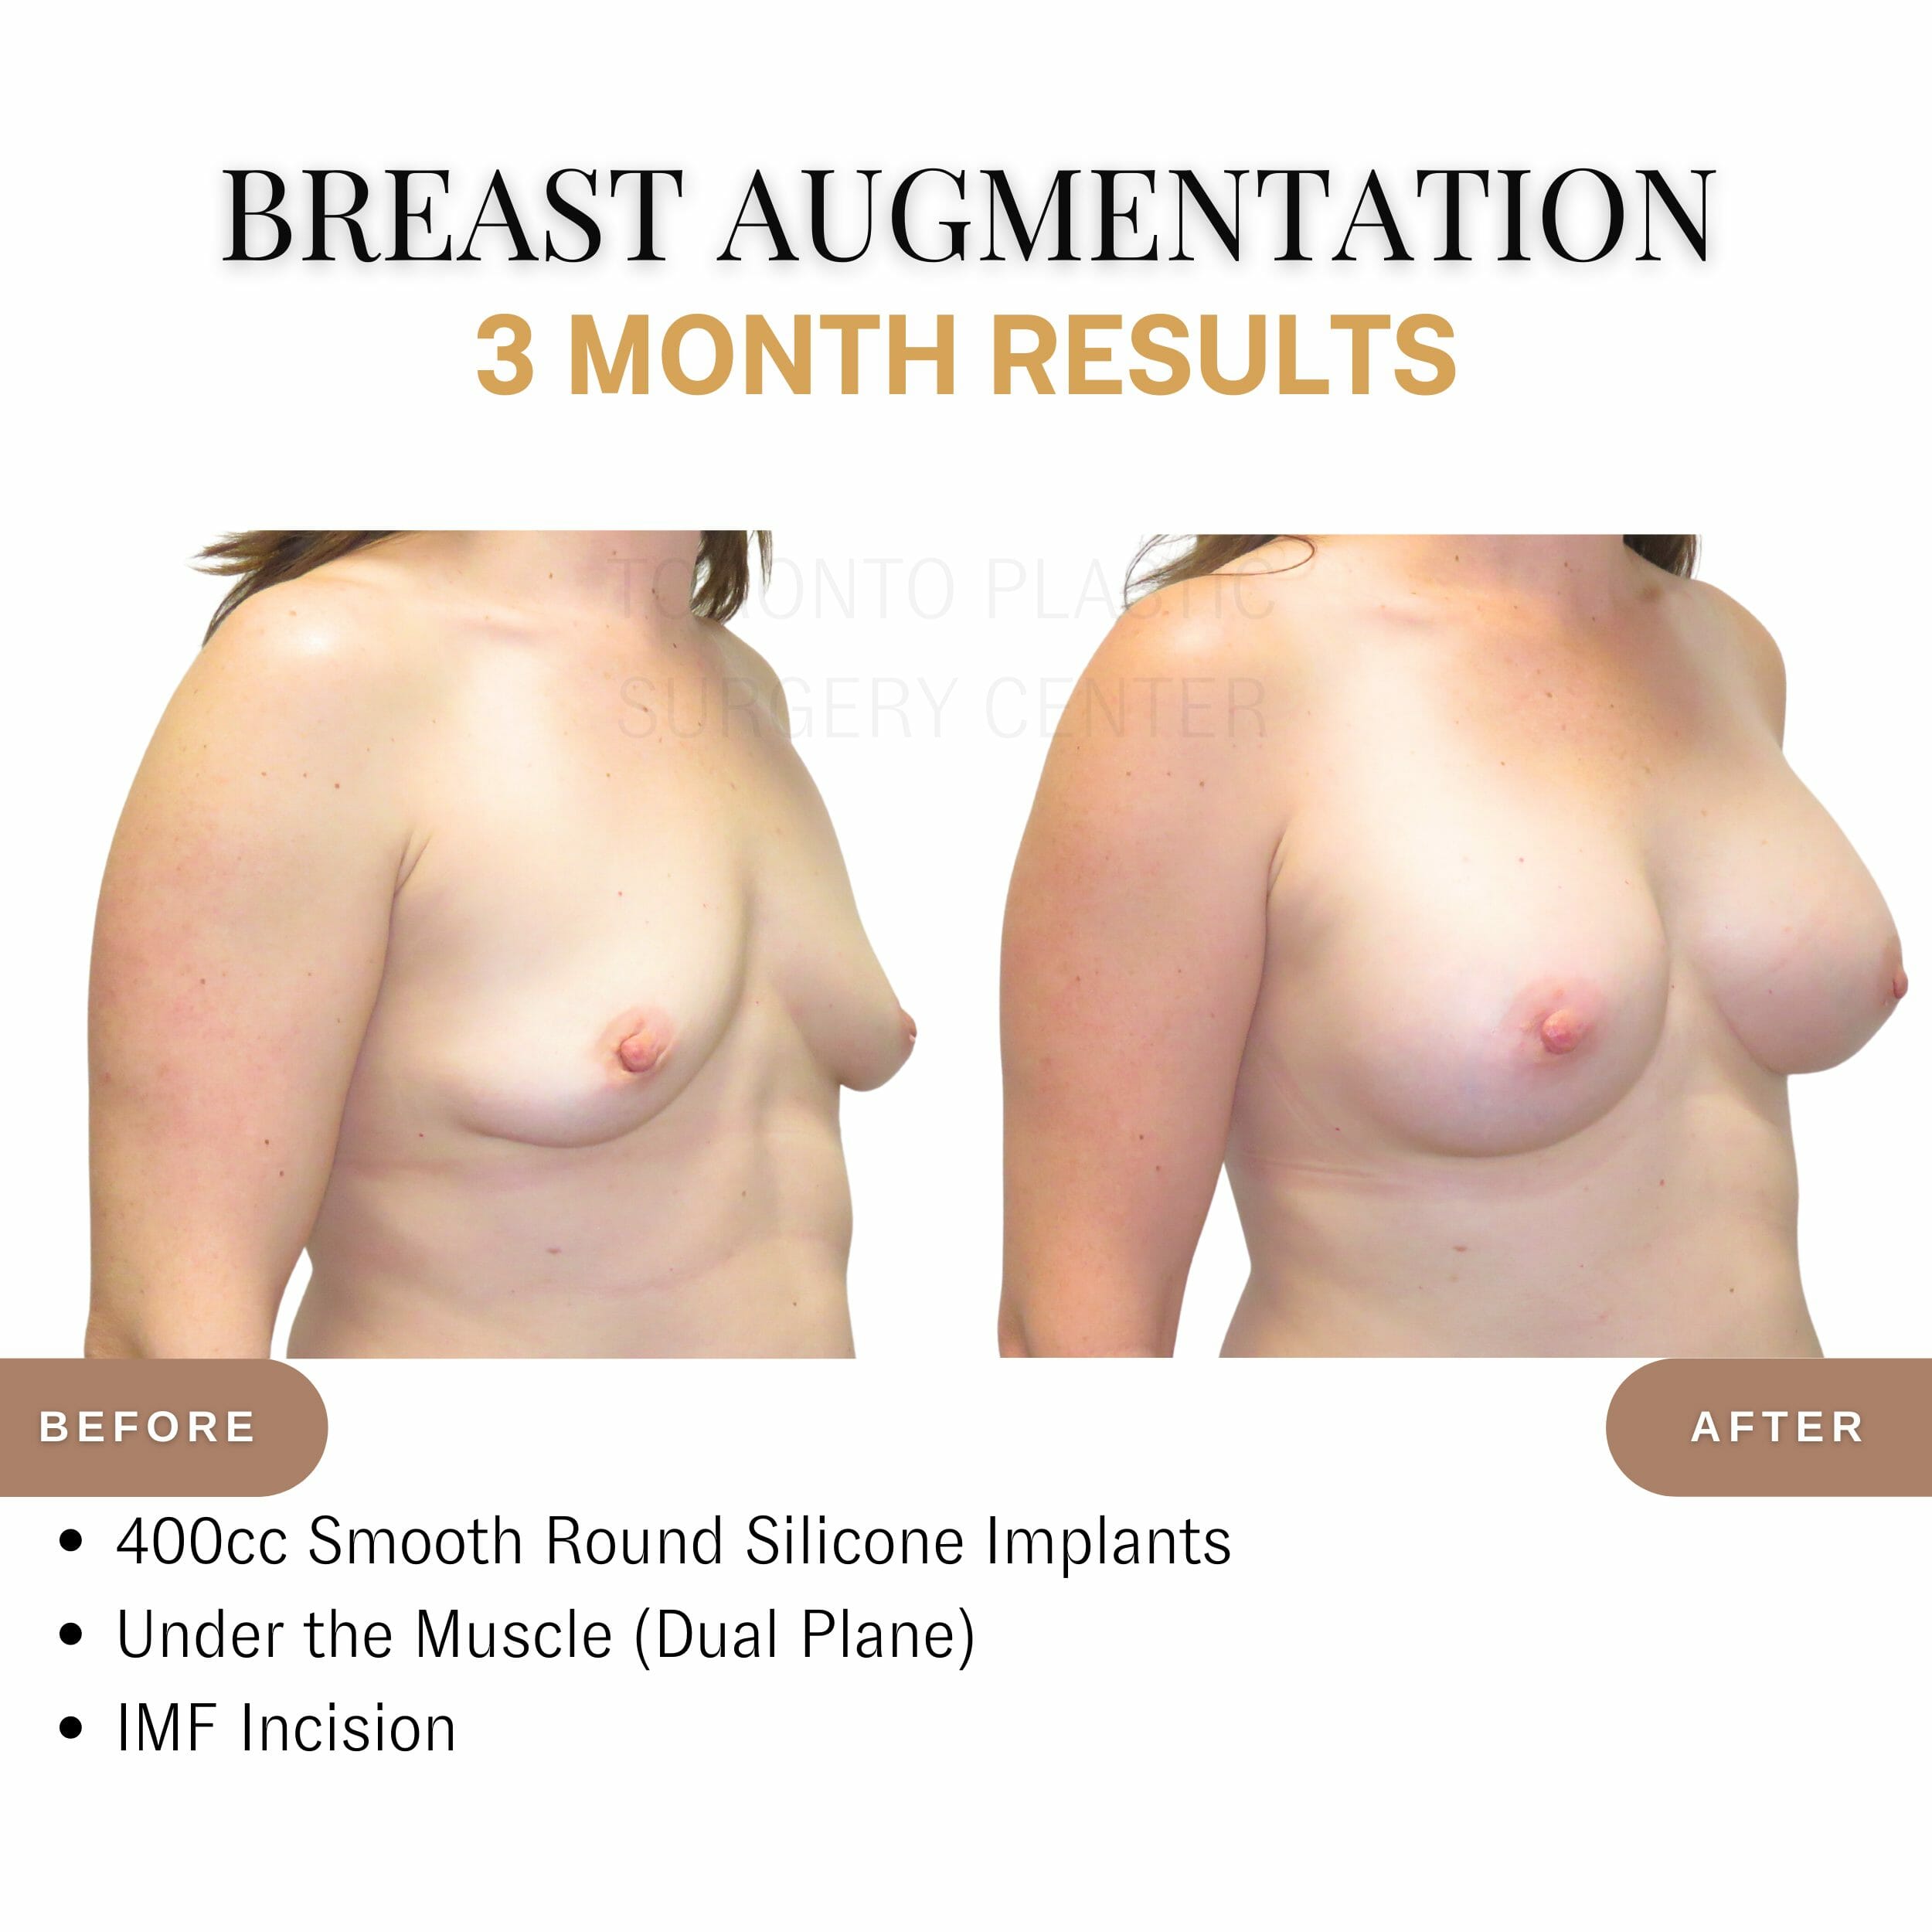 What You Need to Know About Breast Augmentation in the 20s/30s/40s/50s